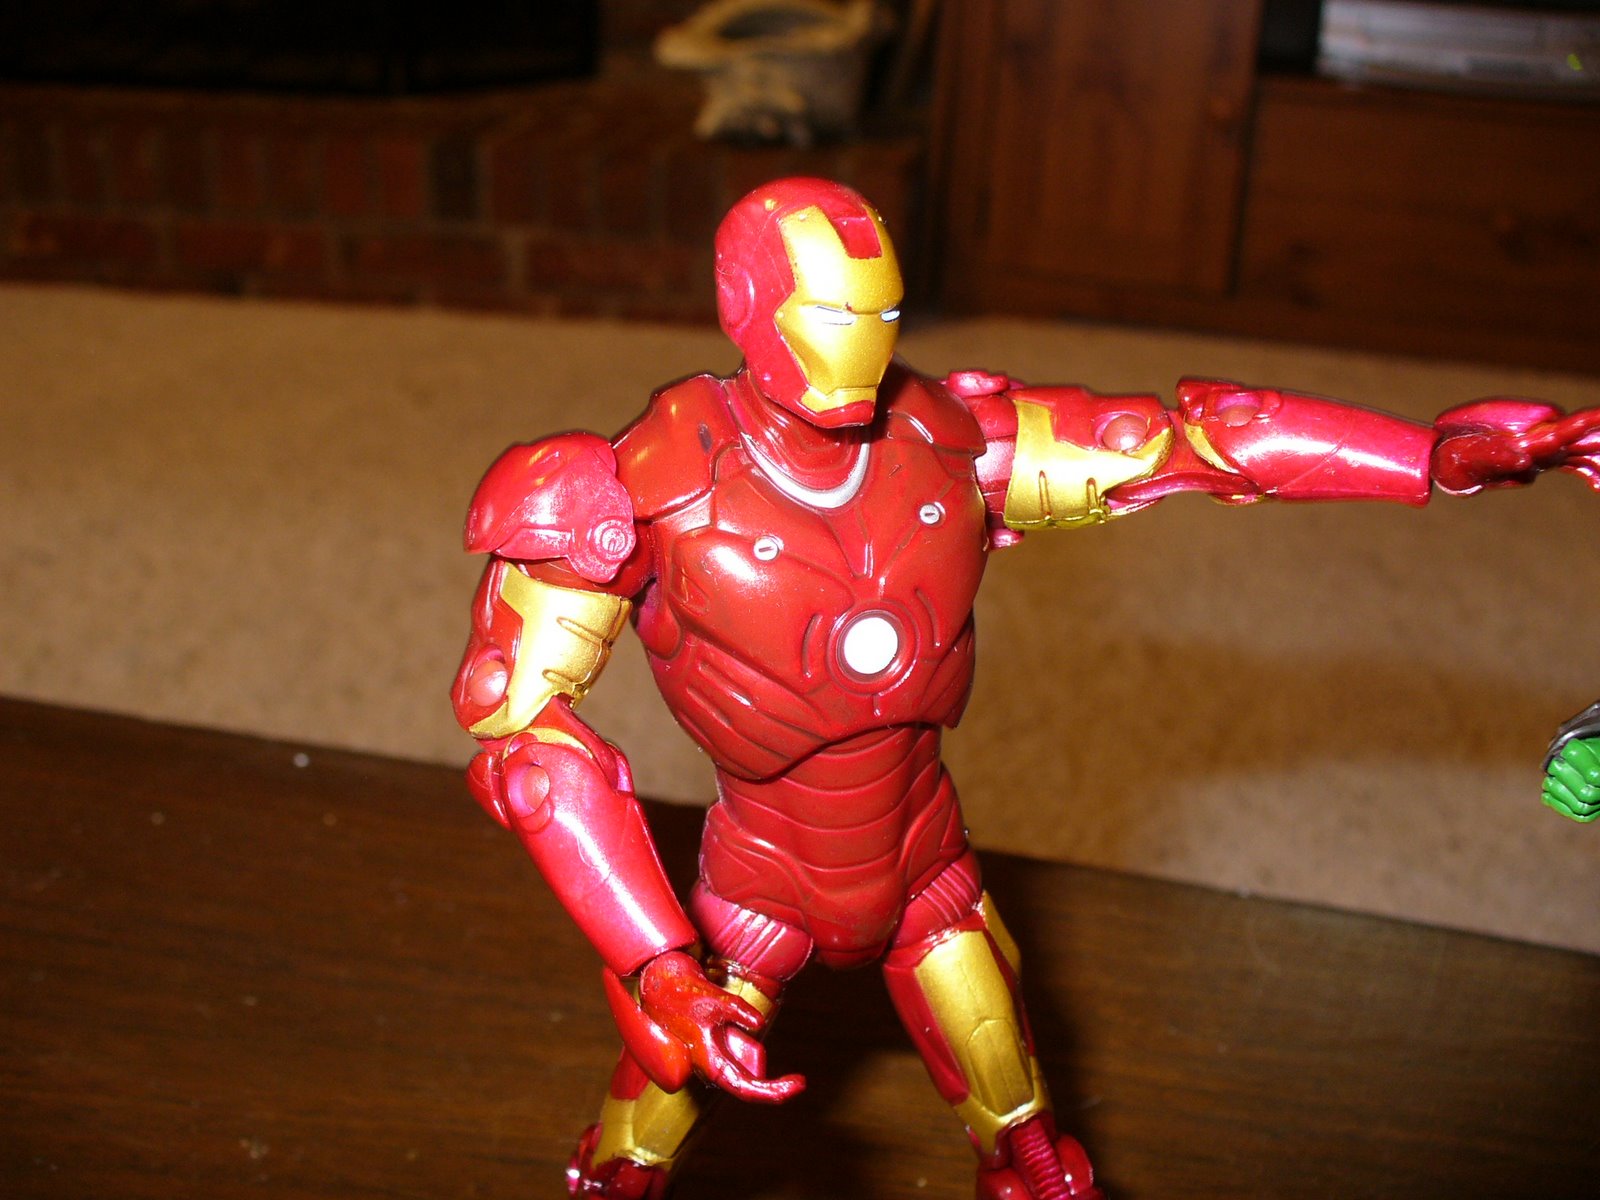 As Iron Man, all jets ablaze / He fights and smites with repulsor rays!